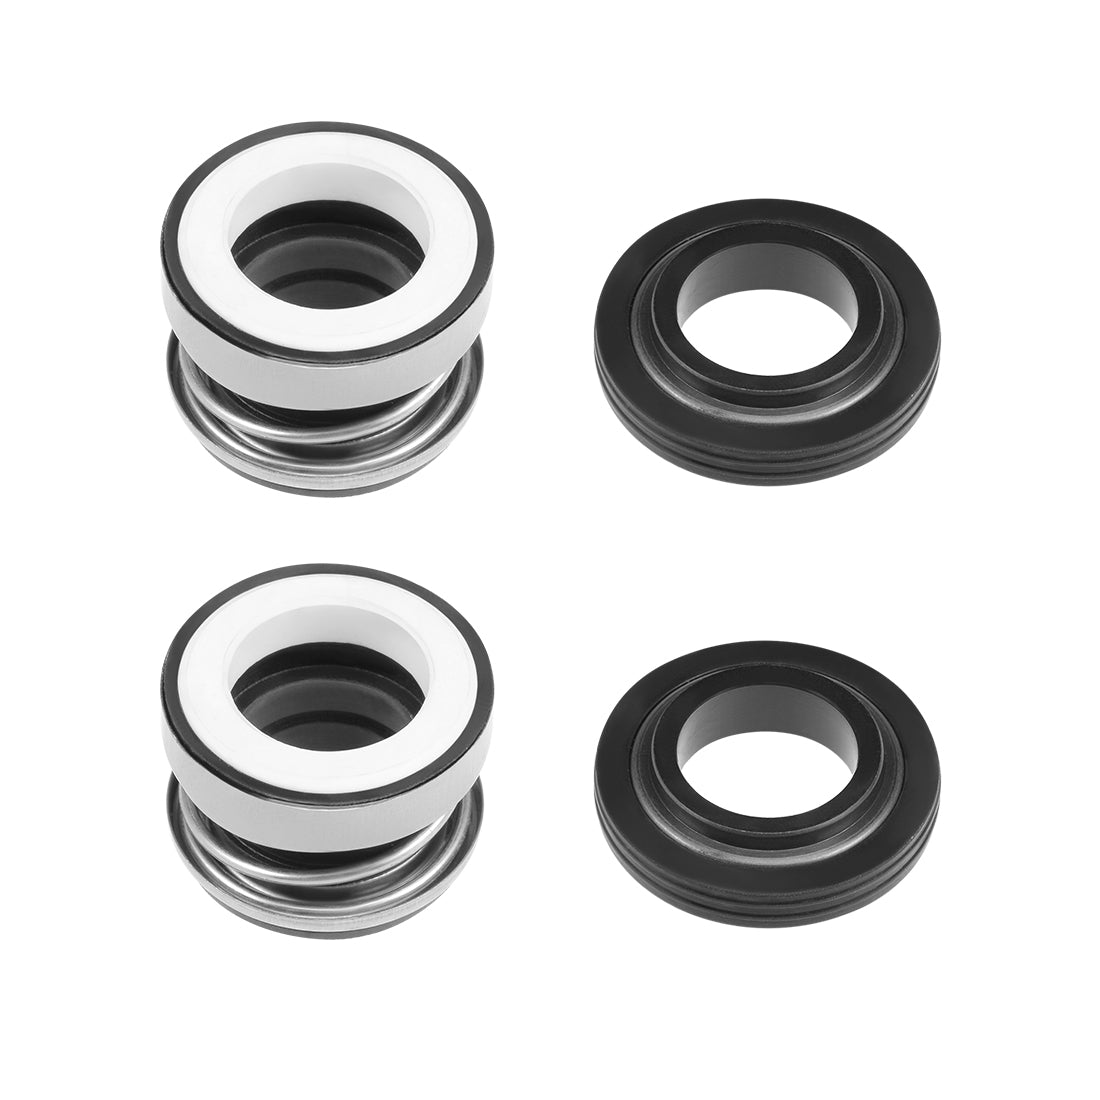 uxcell Uxcell Mechanical Shaft Seal Replacement for Pool Spa Pump 2pcs 103-12